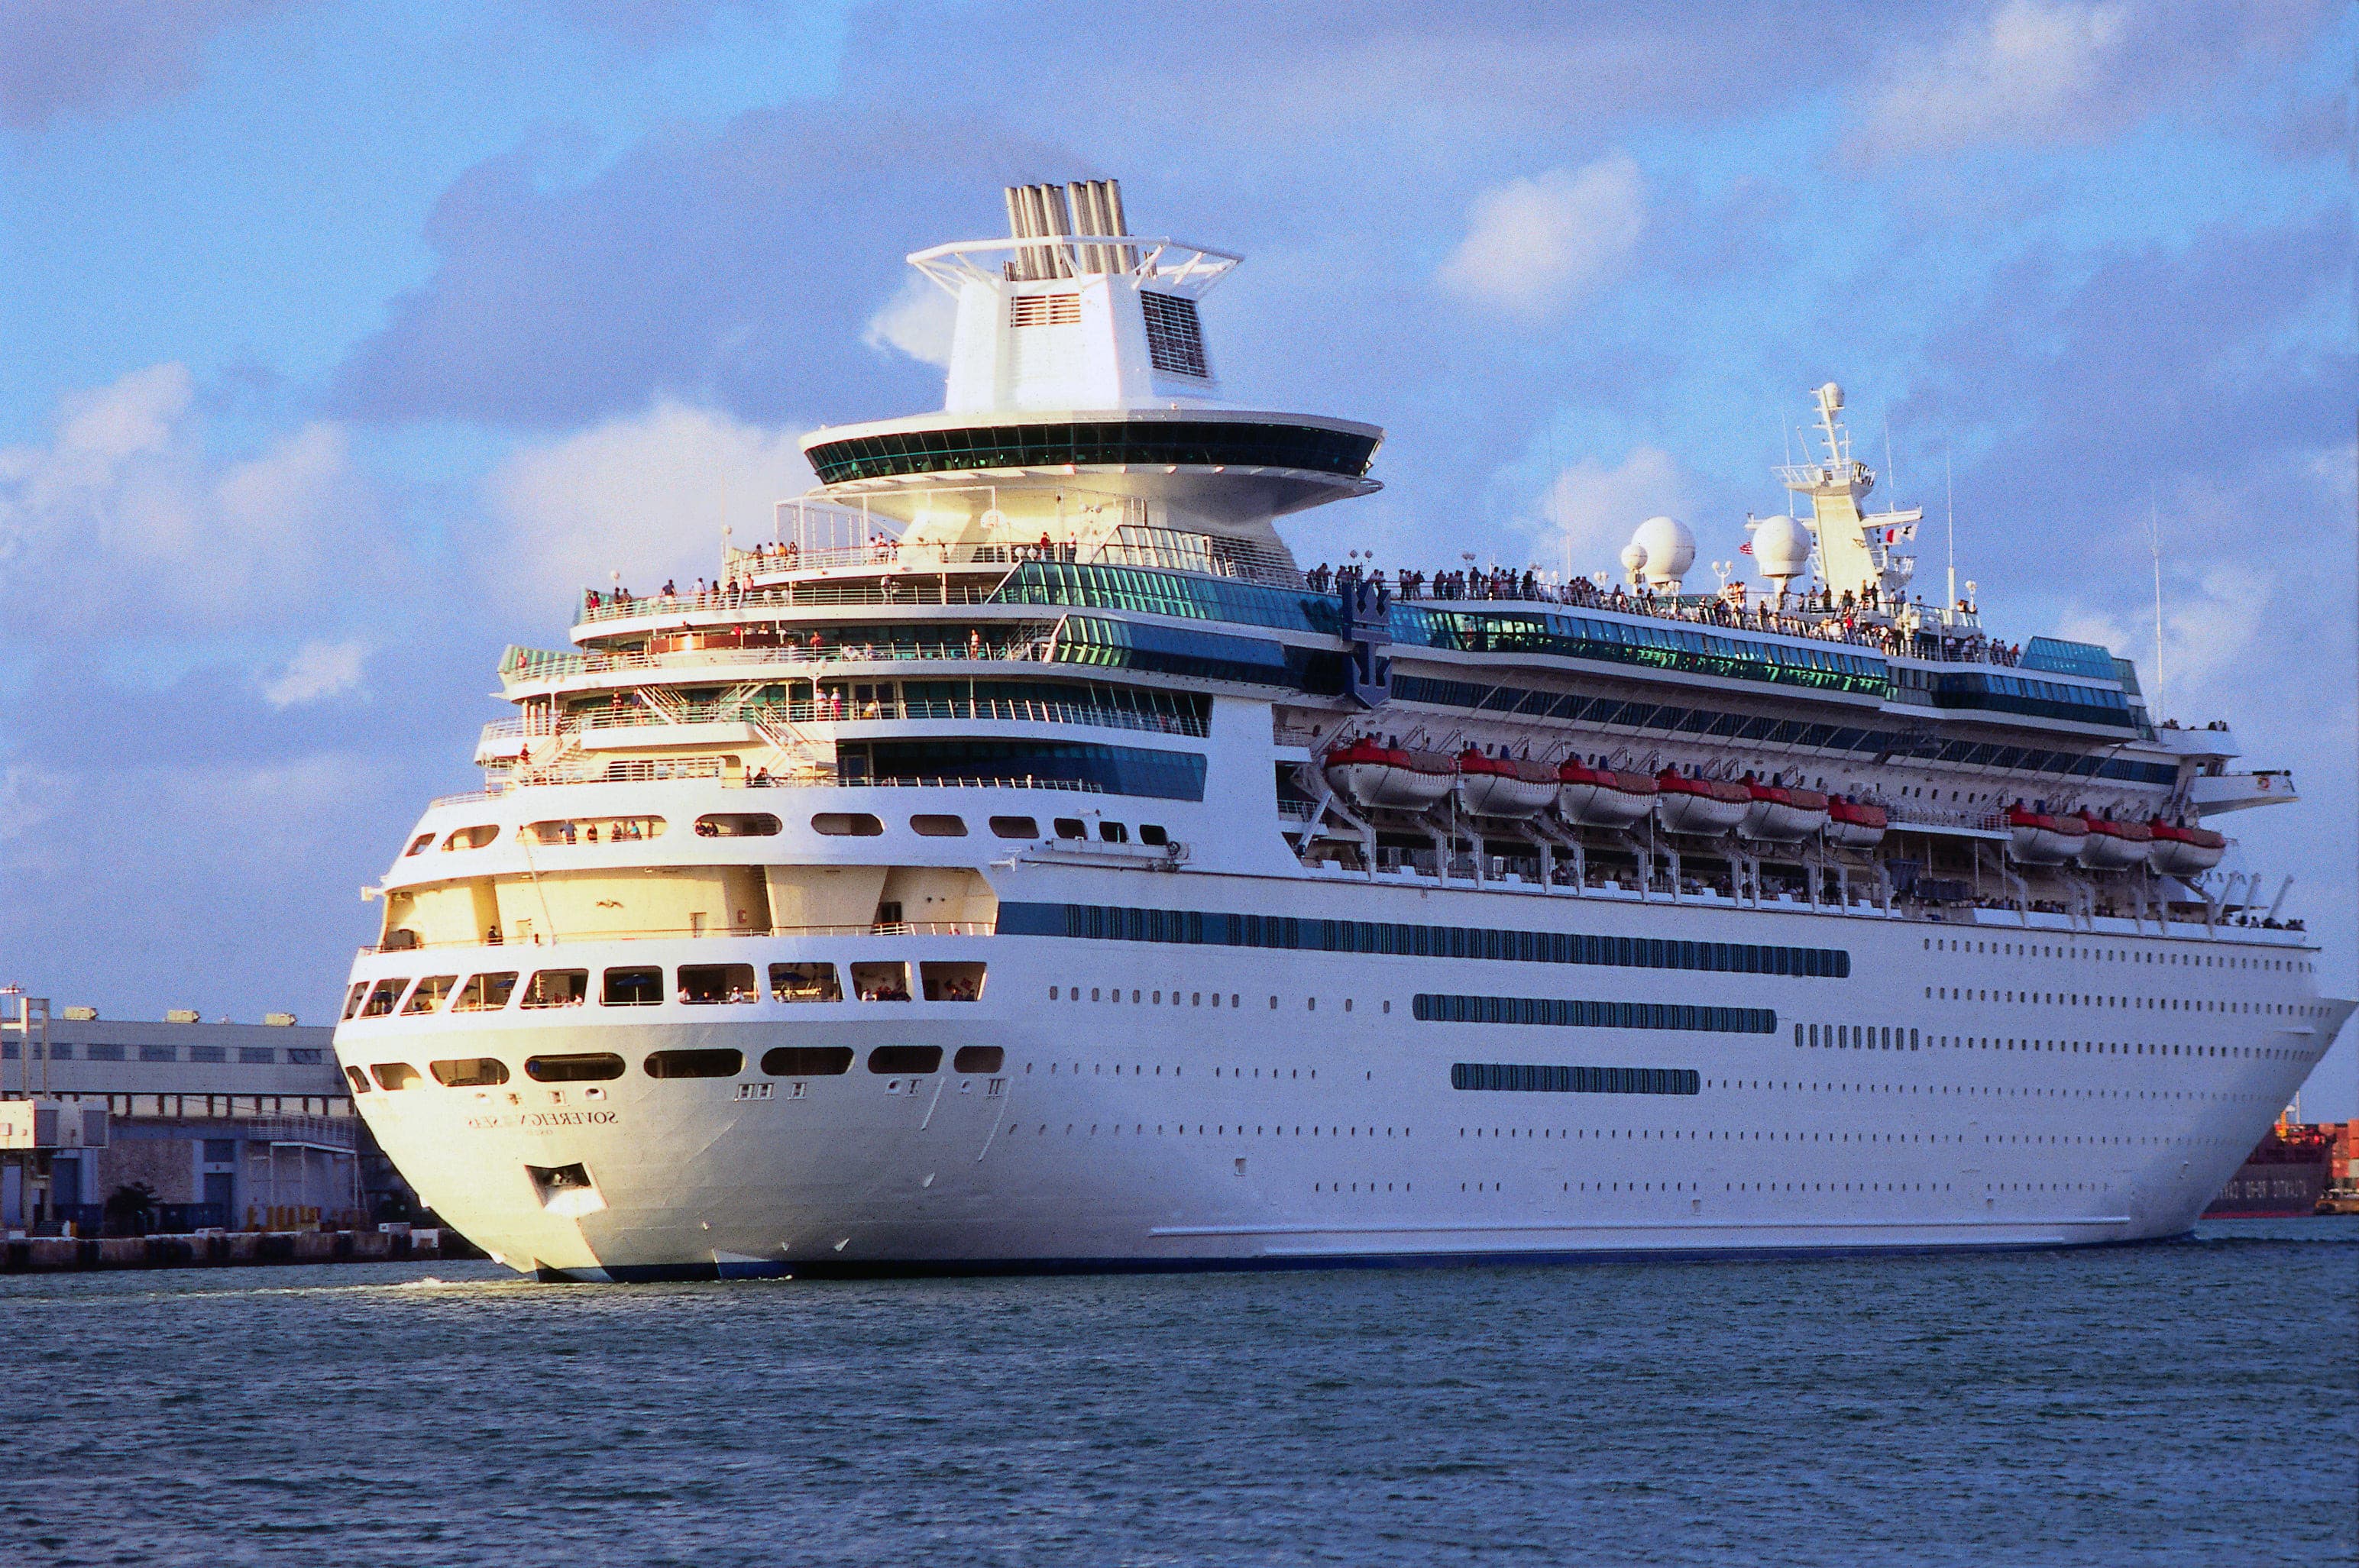 A Cruise ship in the port of Miami - Florida